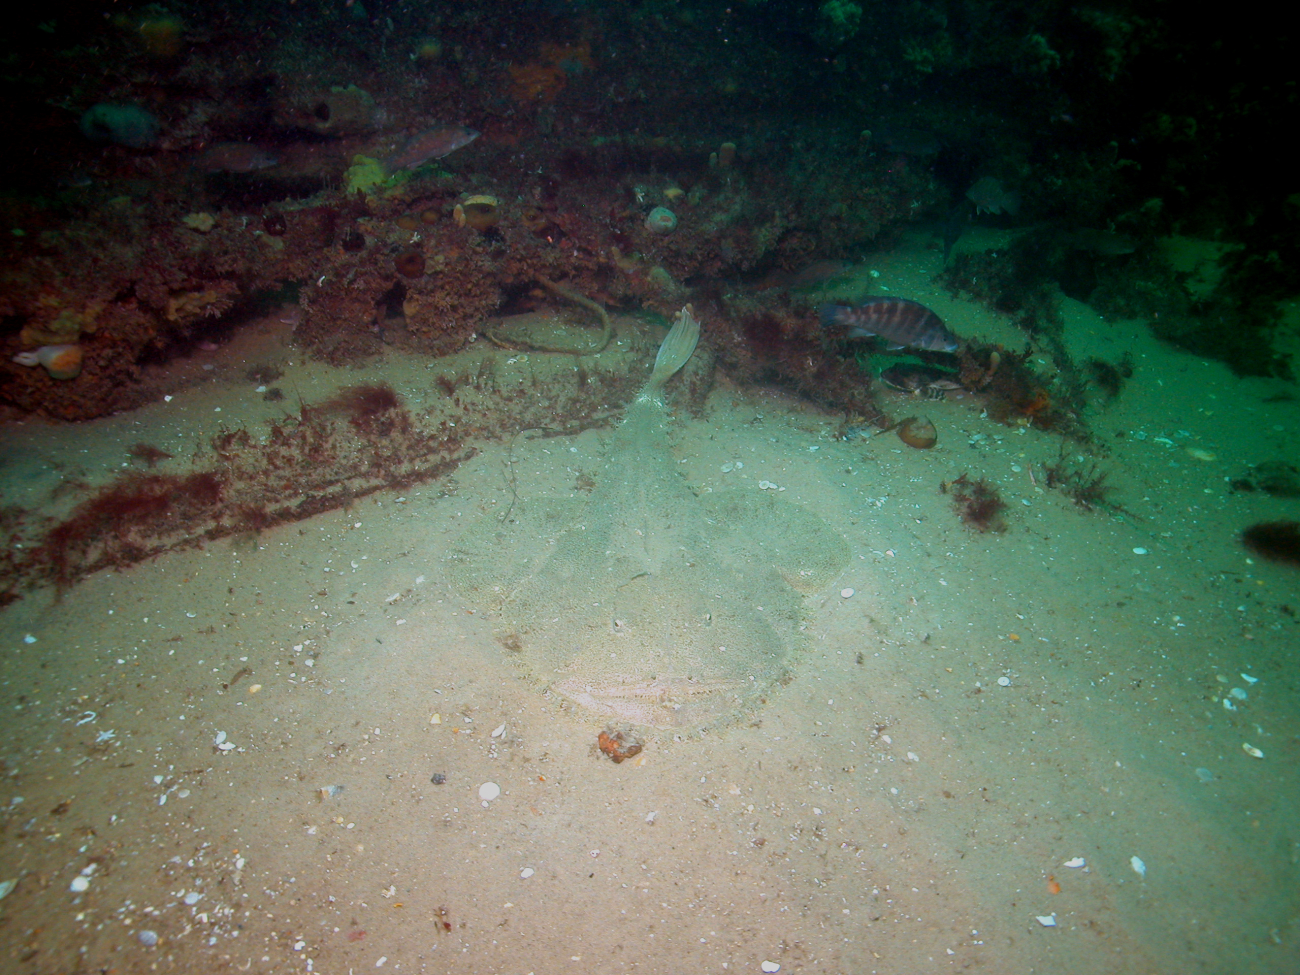 A well-camouflaged to almost invisible monkfish